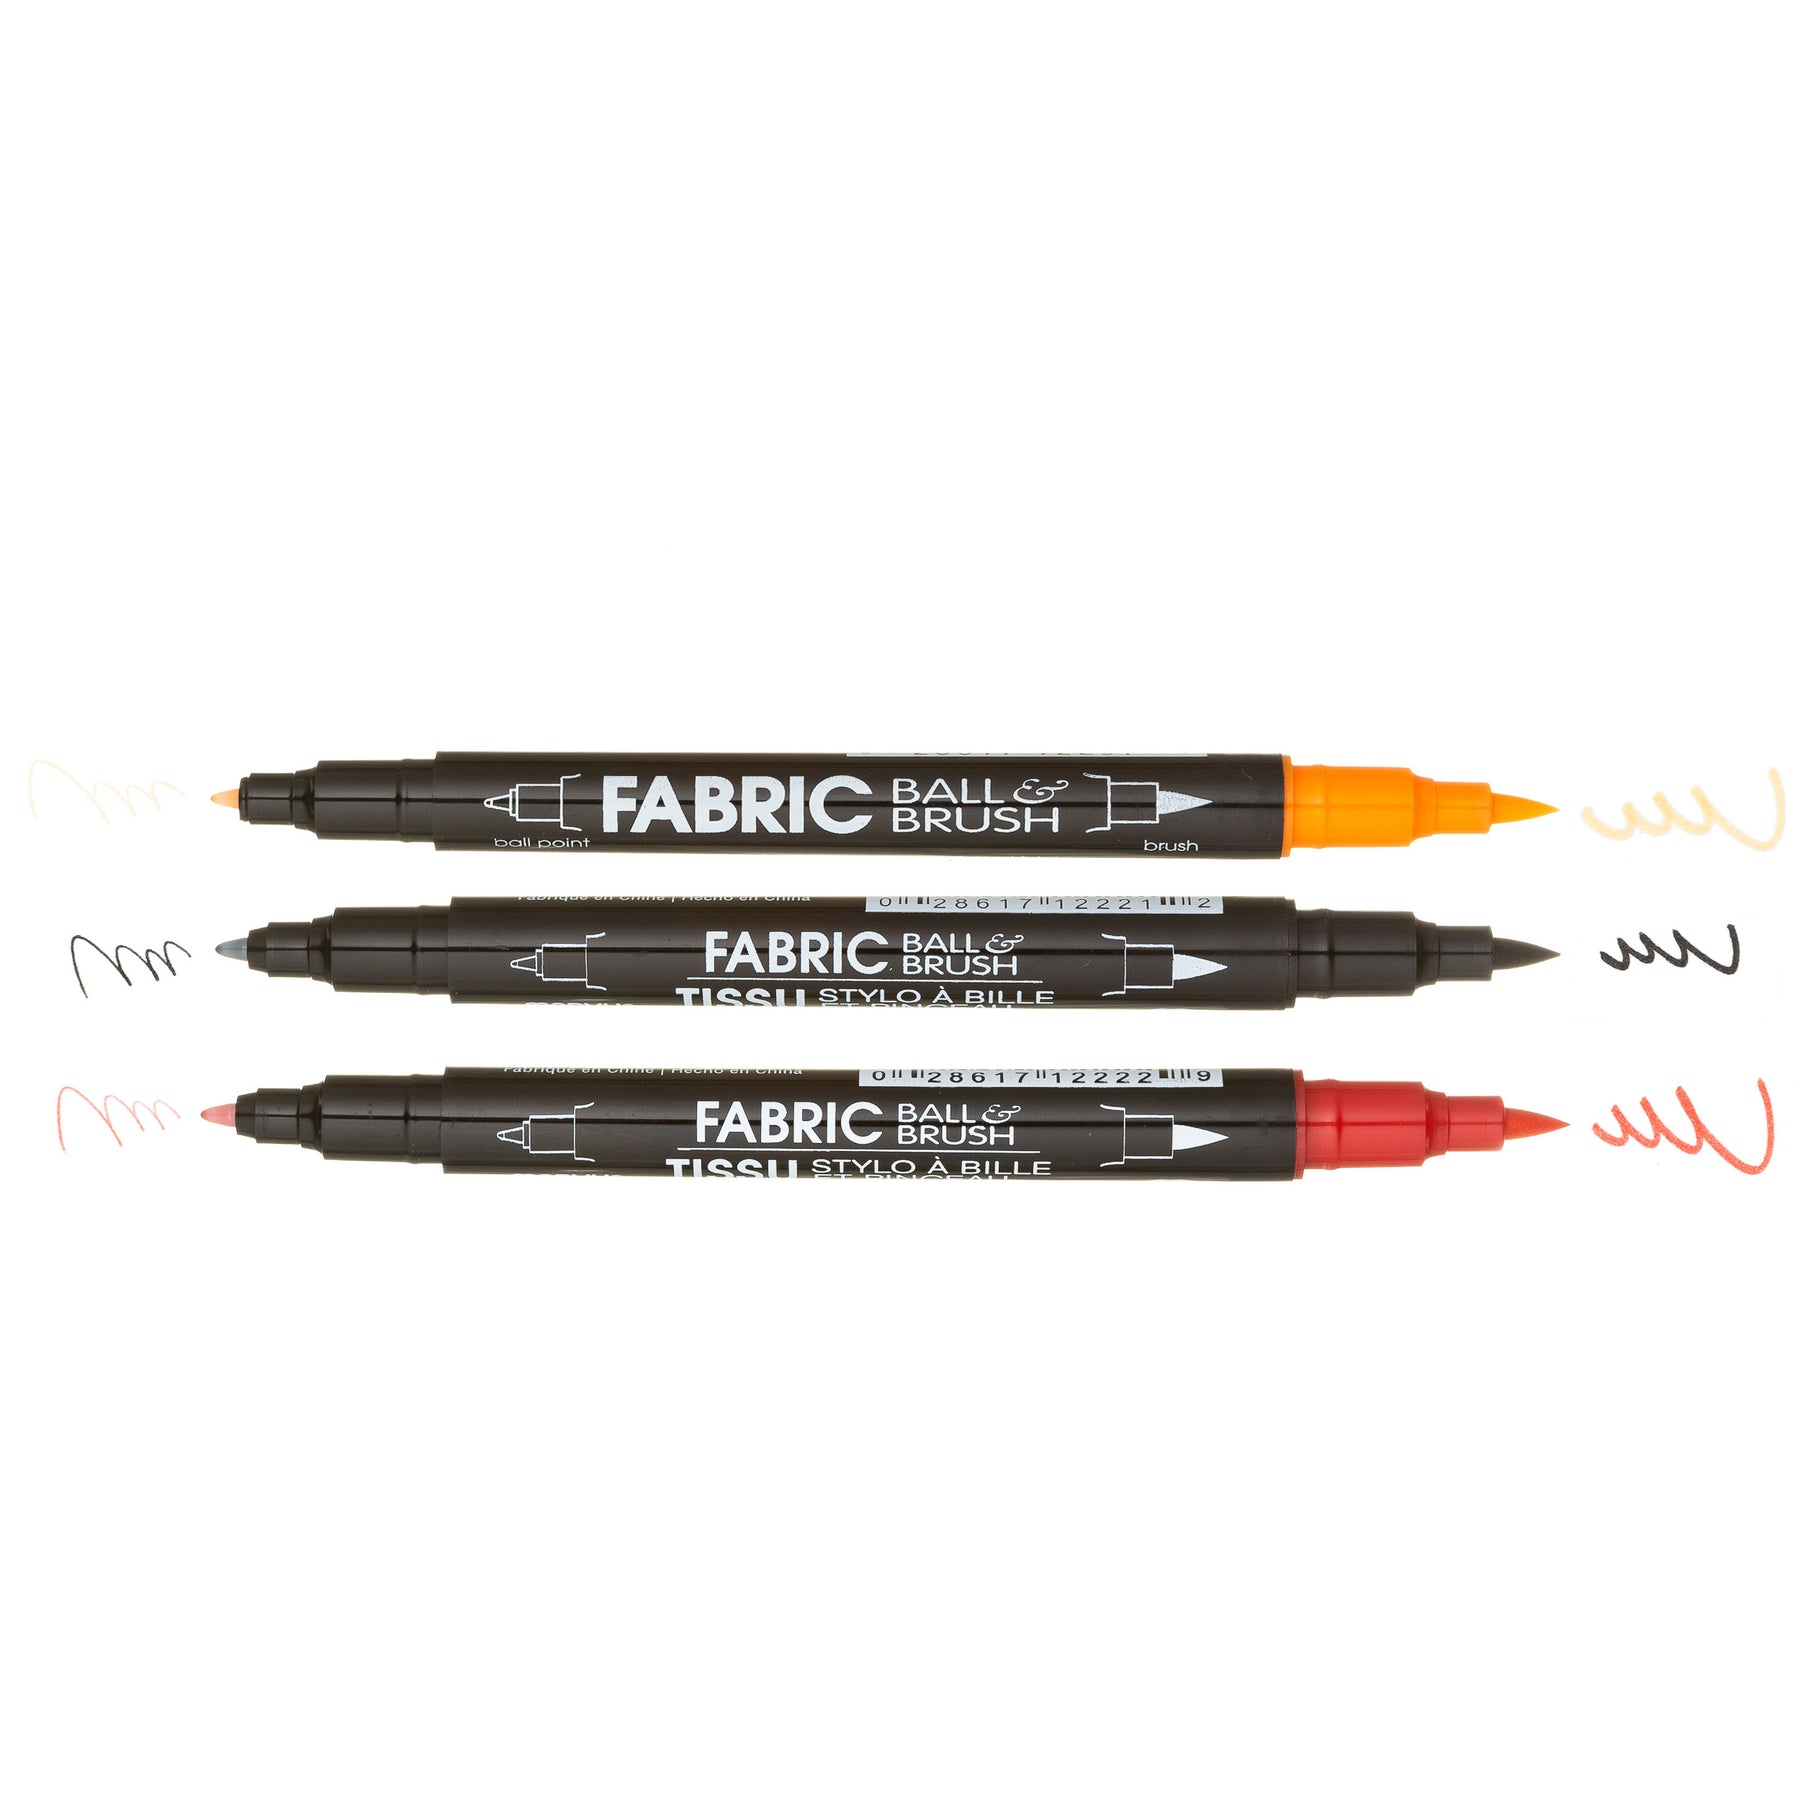 FABRIC BALL AND BRUSH 3 PIECE SET A